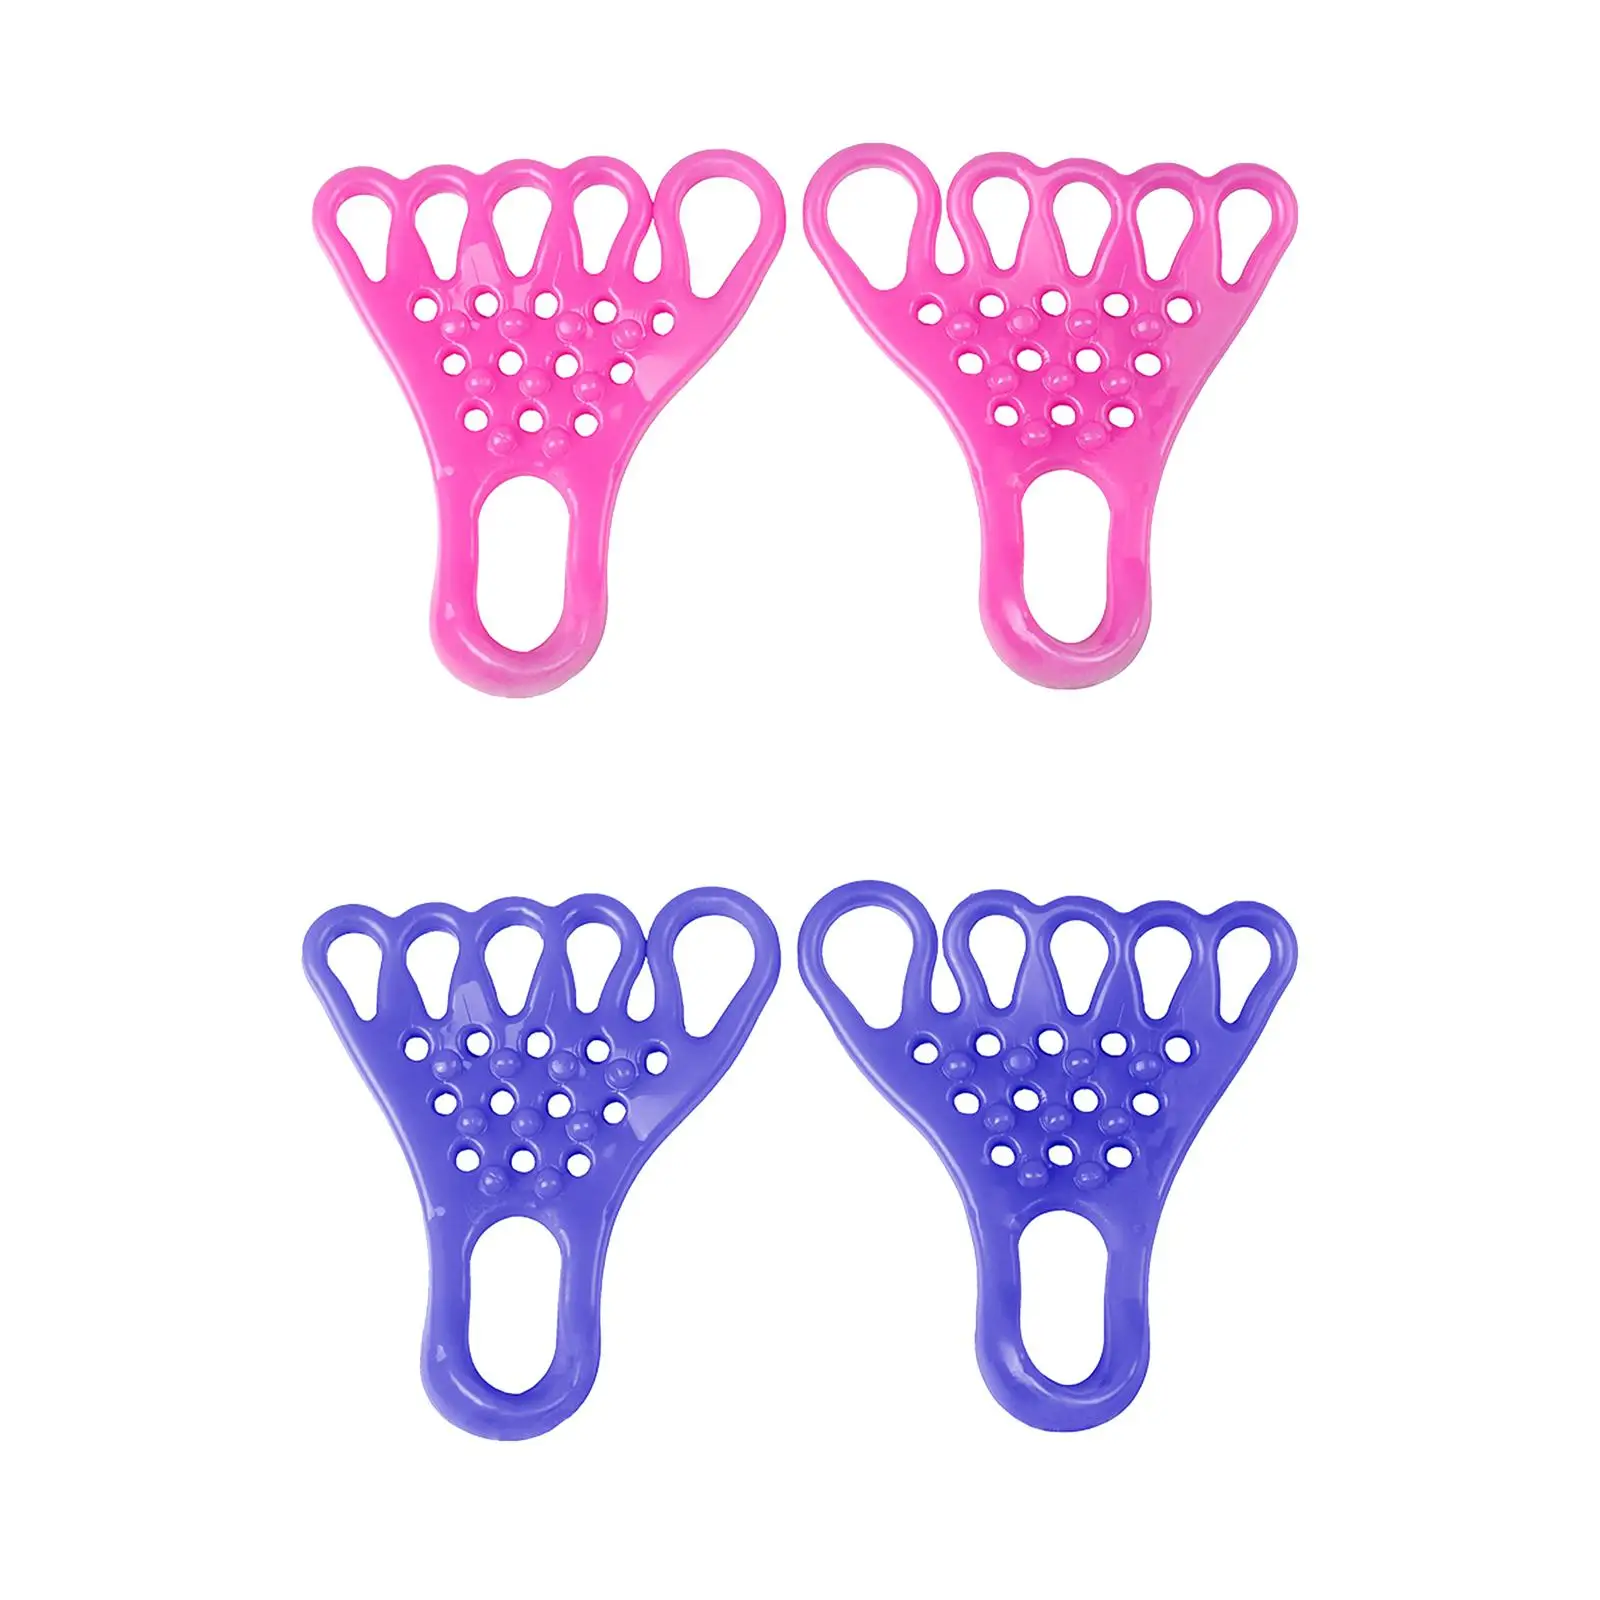 Toe Straightener Bunion Corrector Toe Protector Nail Tools Hammer Toe Splints for Overlapping Toes Bunions Curled Toes Women Men